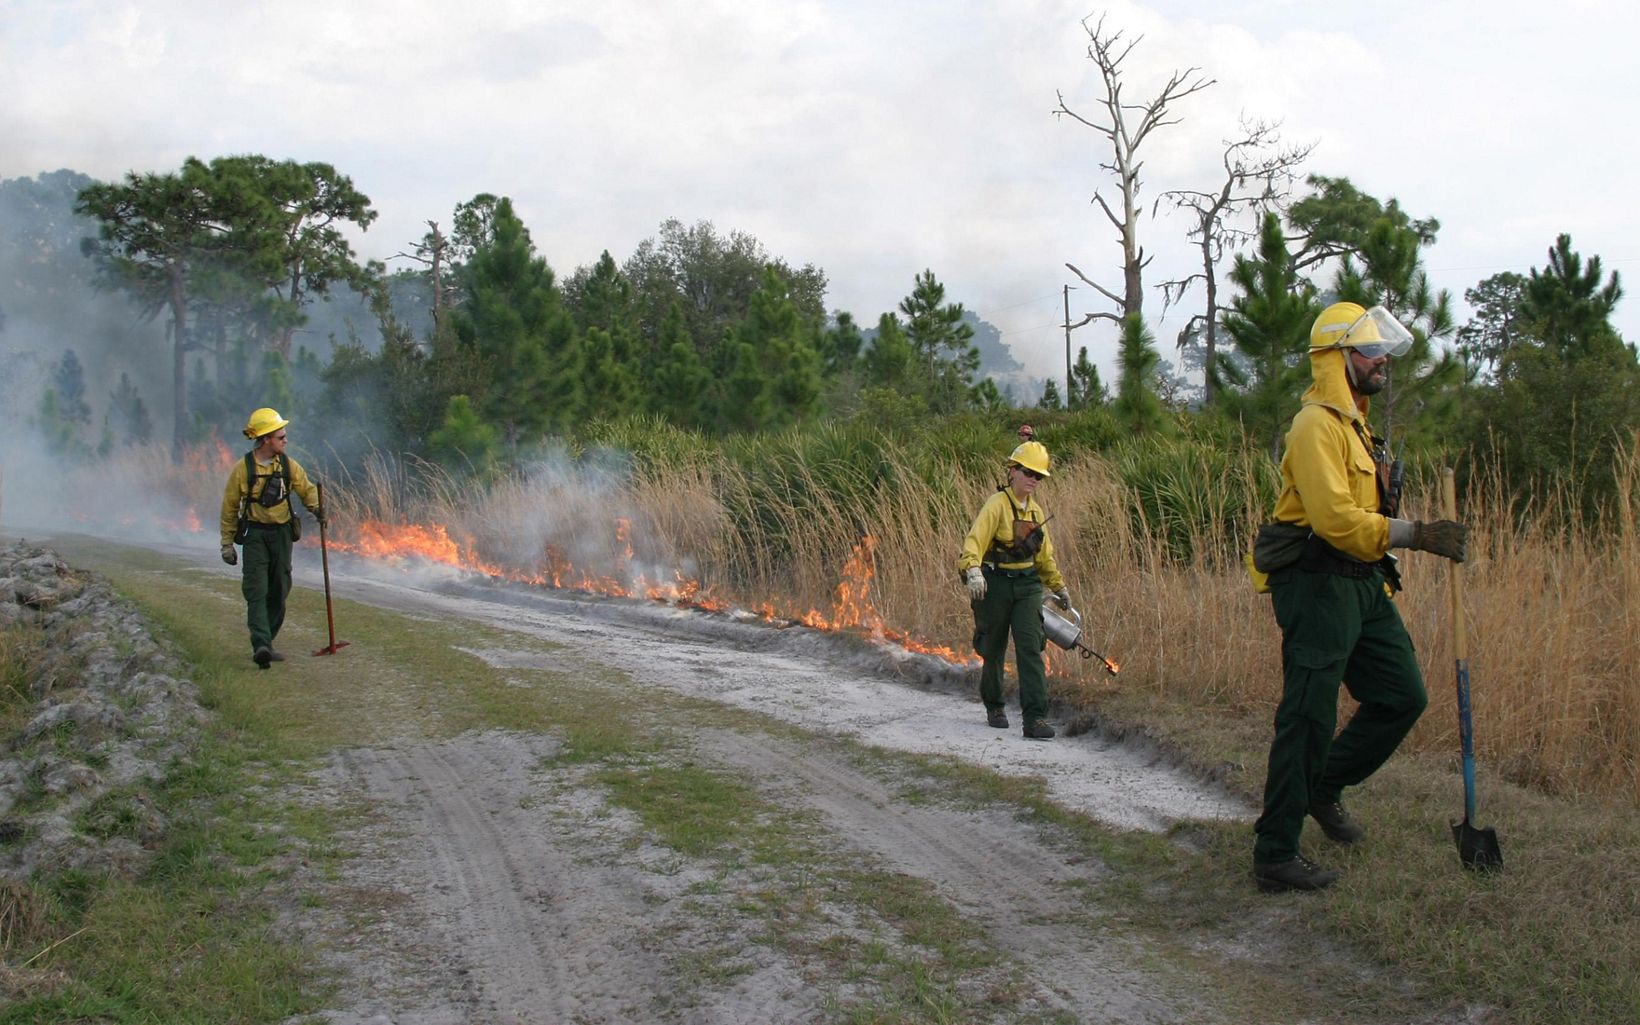 Prescribed fire practitioners walk along a trail at the edge of a prescribed burn and observe the fire at Disney Wilderness Preserve.